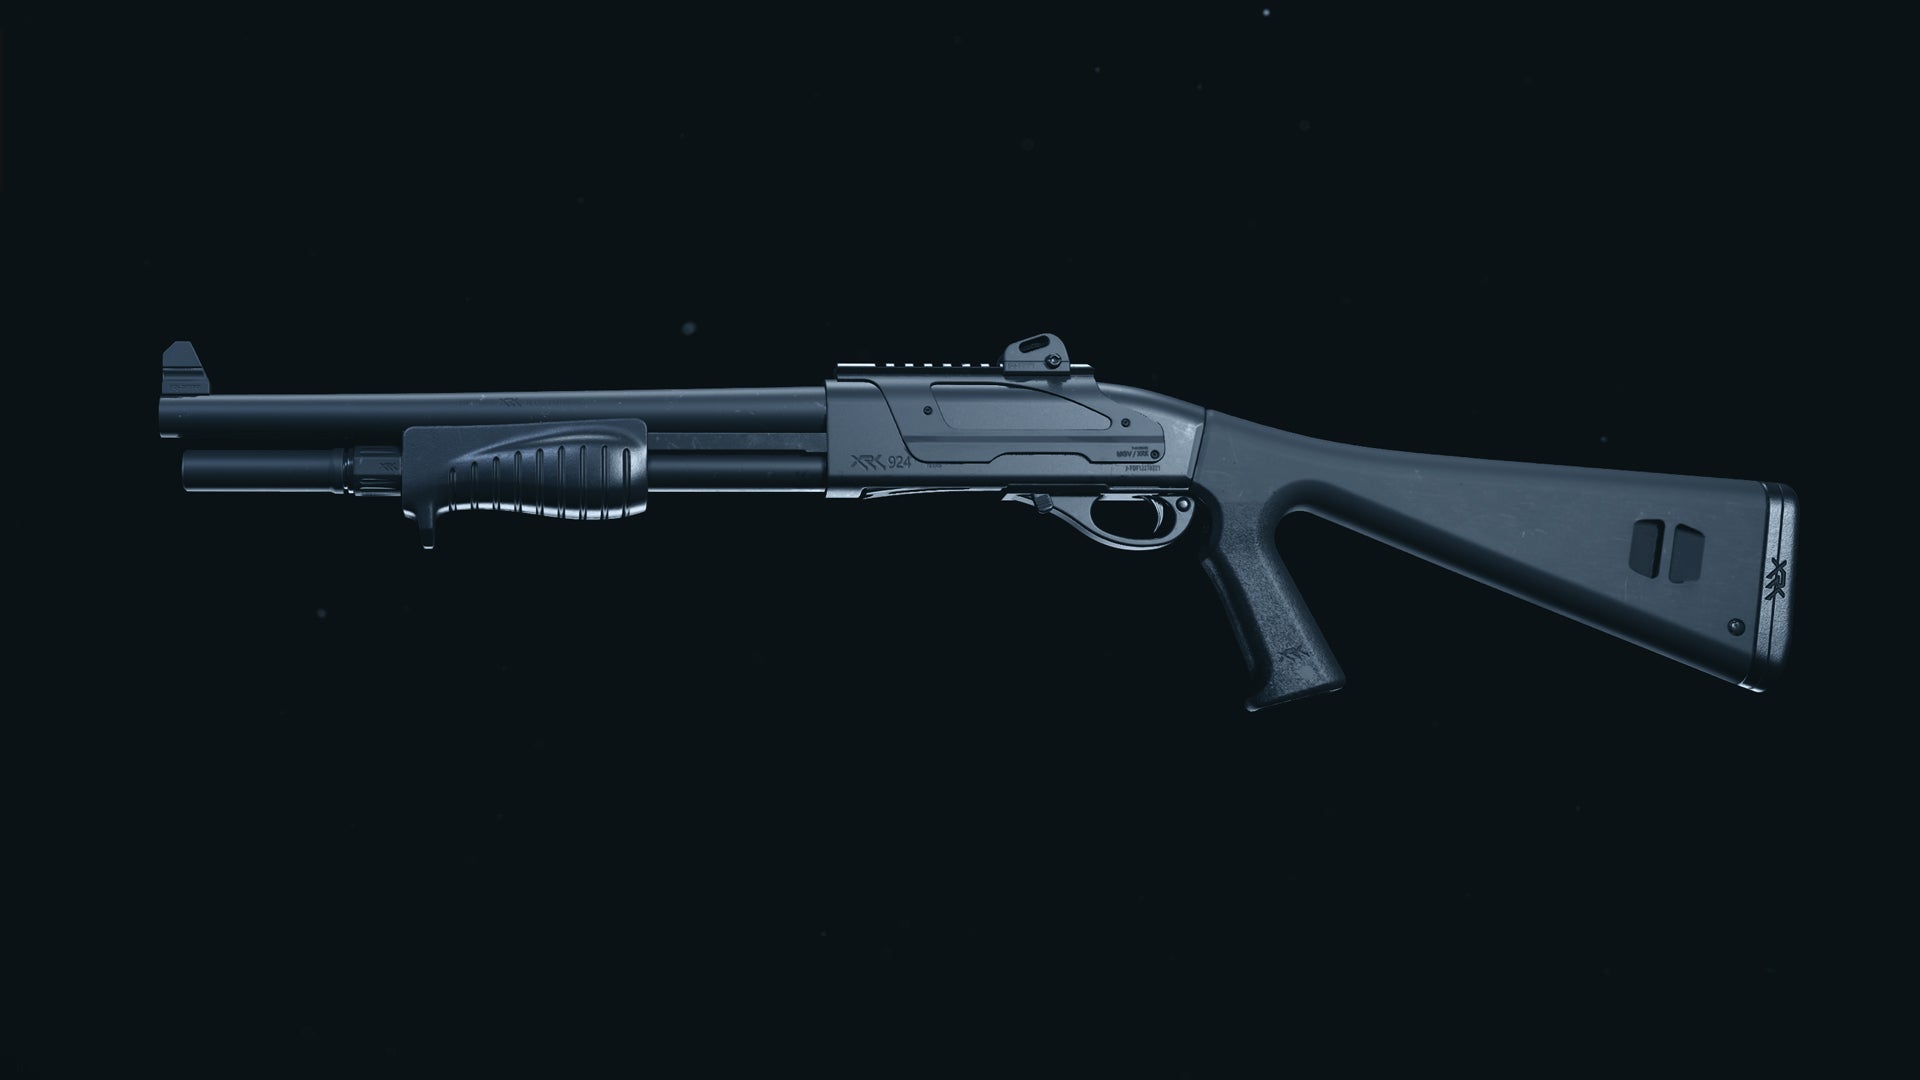 A screenshot of the Model 680 shotgun as it appears in the Call of Duty: Warzone Gunsmith.